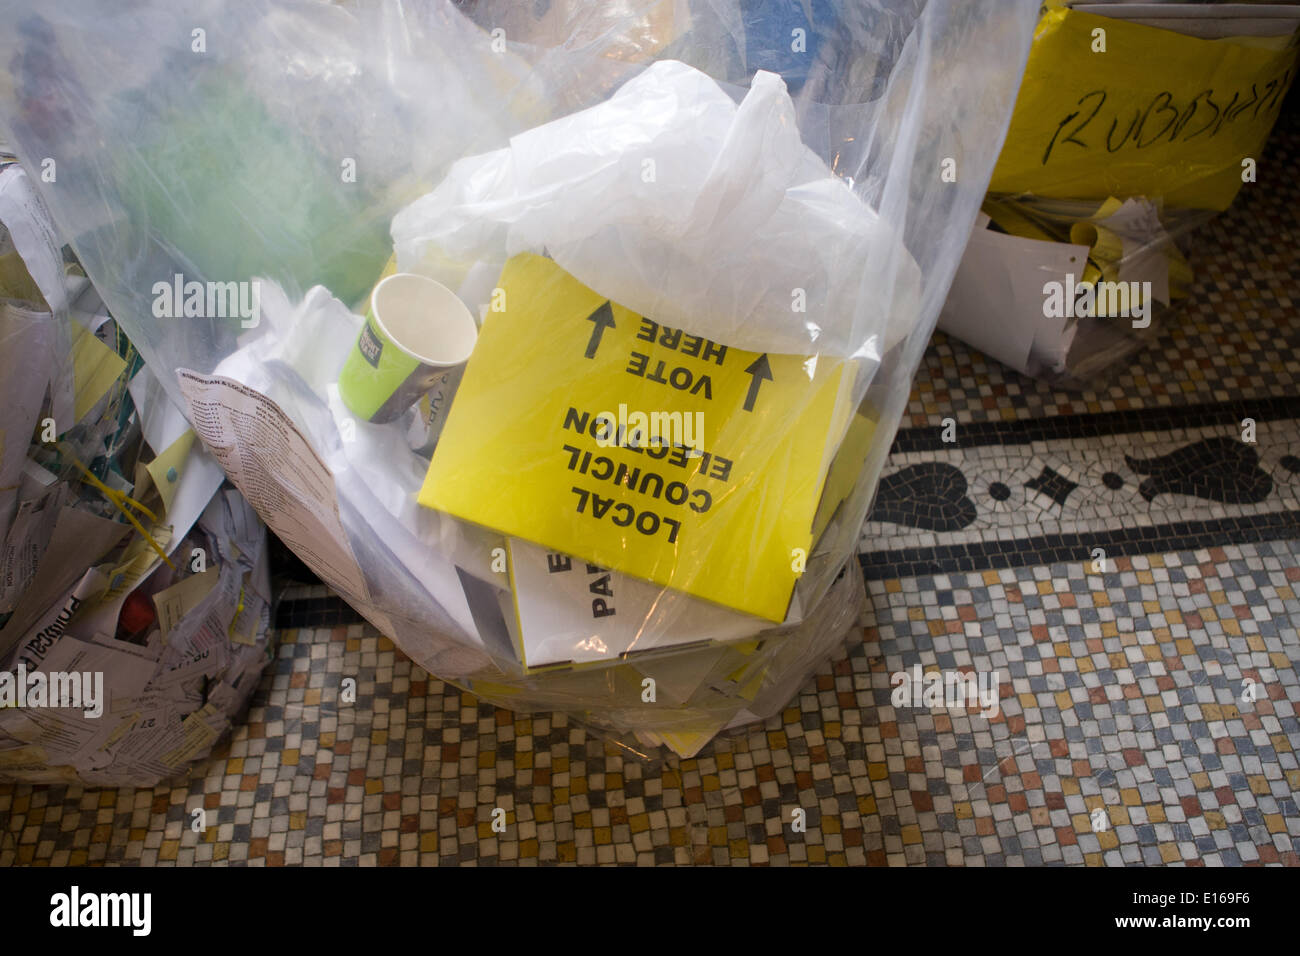 Belfast,UK 23rd May 2014. Election sign in Clear Plastic Rubbish bag Credit:  Bonzo/Alamy Live News Stock Photo